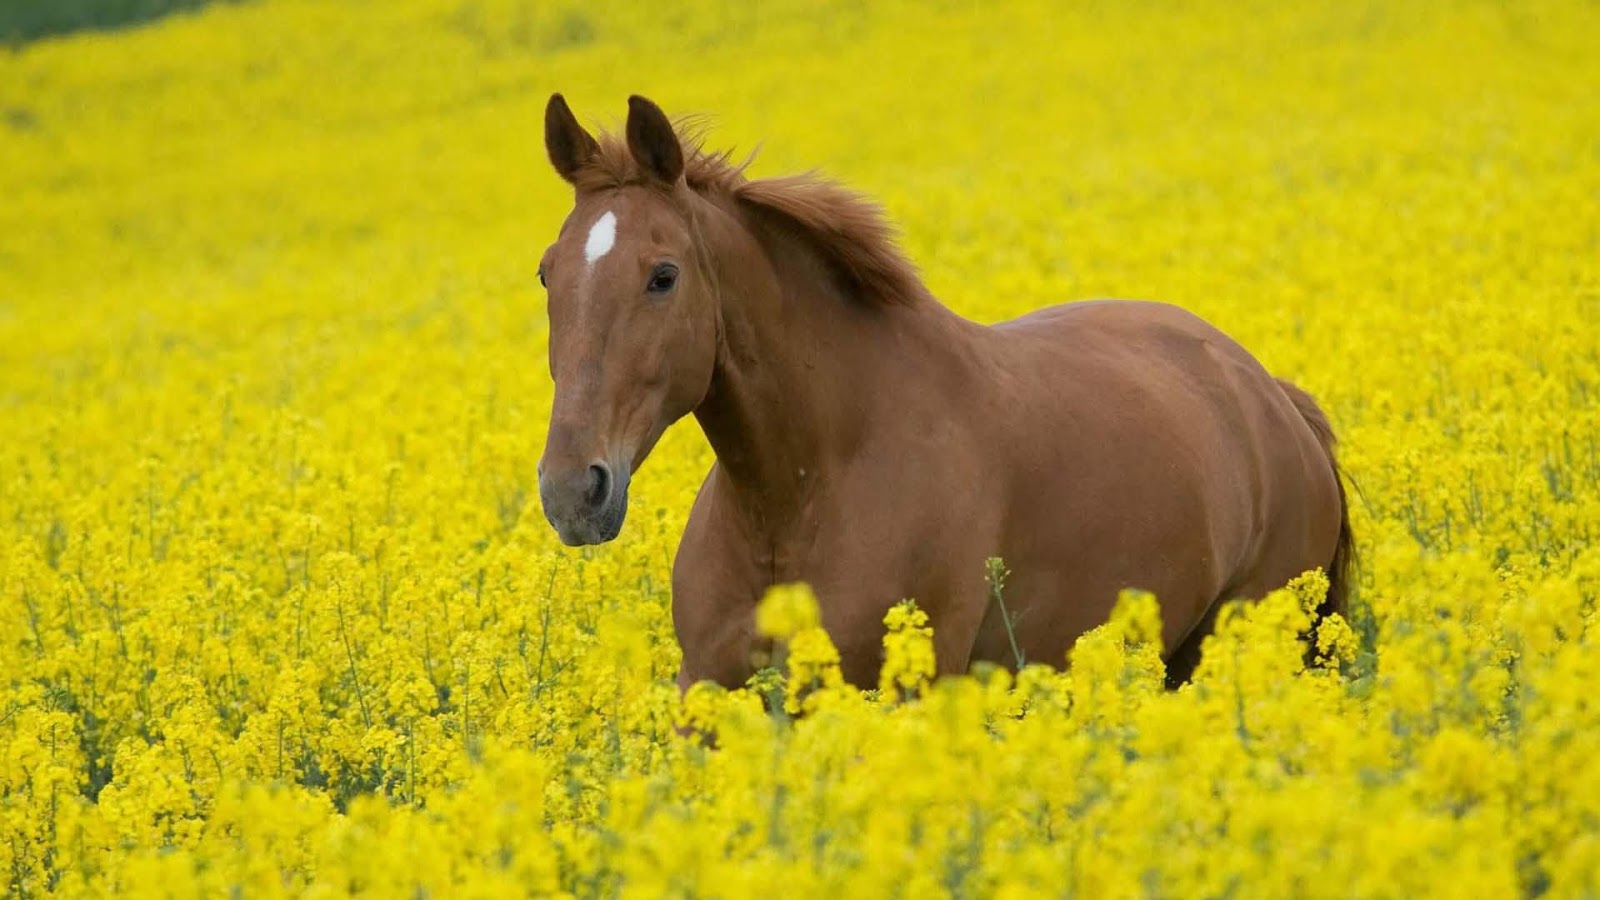 Cute Horse Wallpaper Android Apps On Google Play